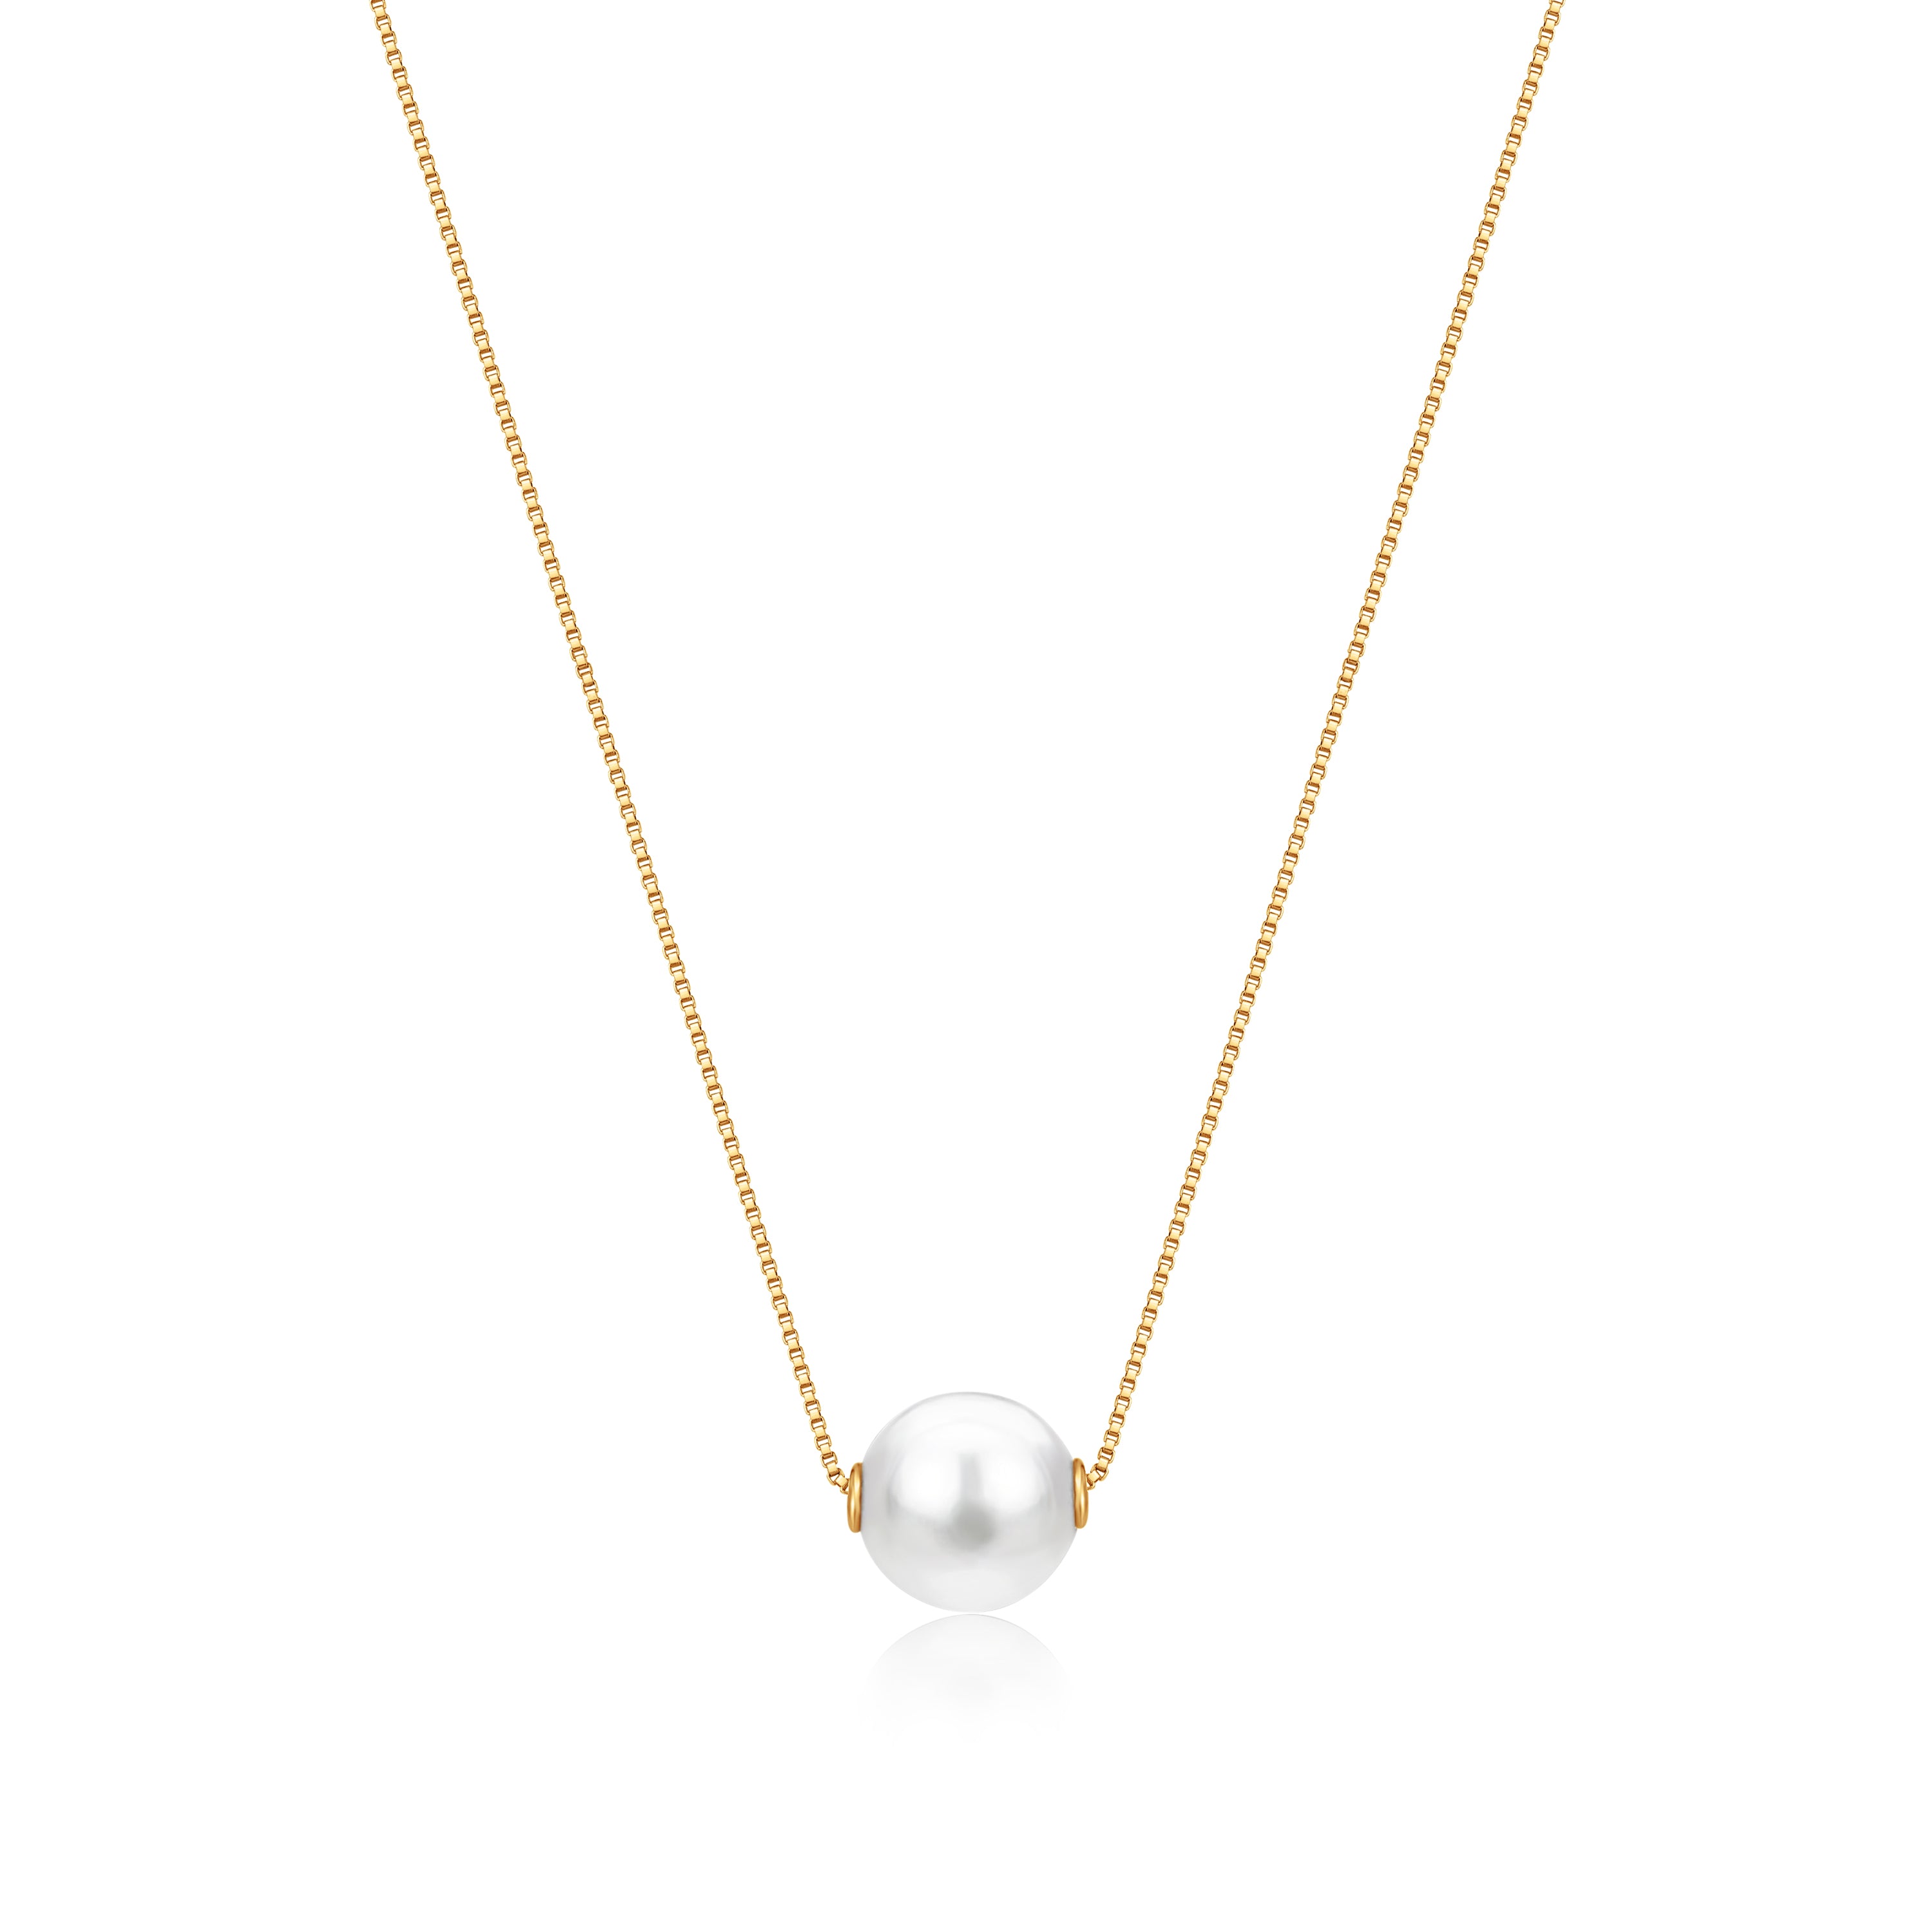 14K Yellow White or Rose Gold Necklace Pendant with Floating Freshwater Cultured Pearl 15.5"